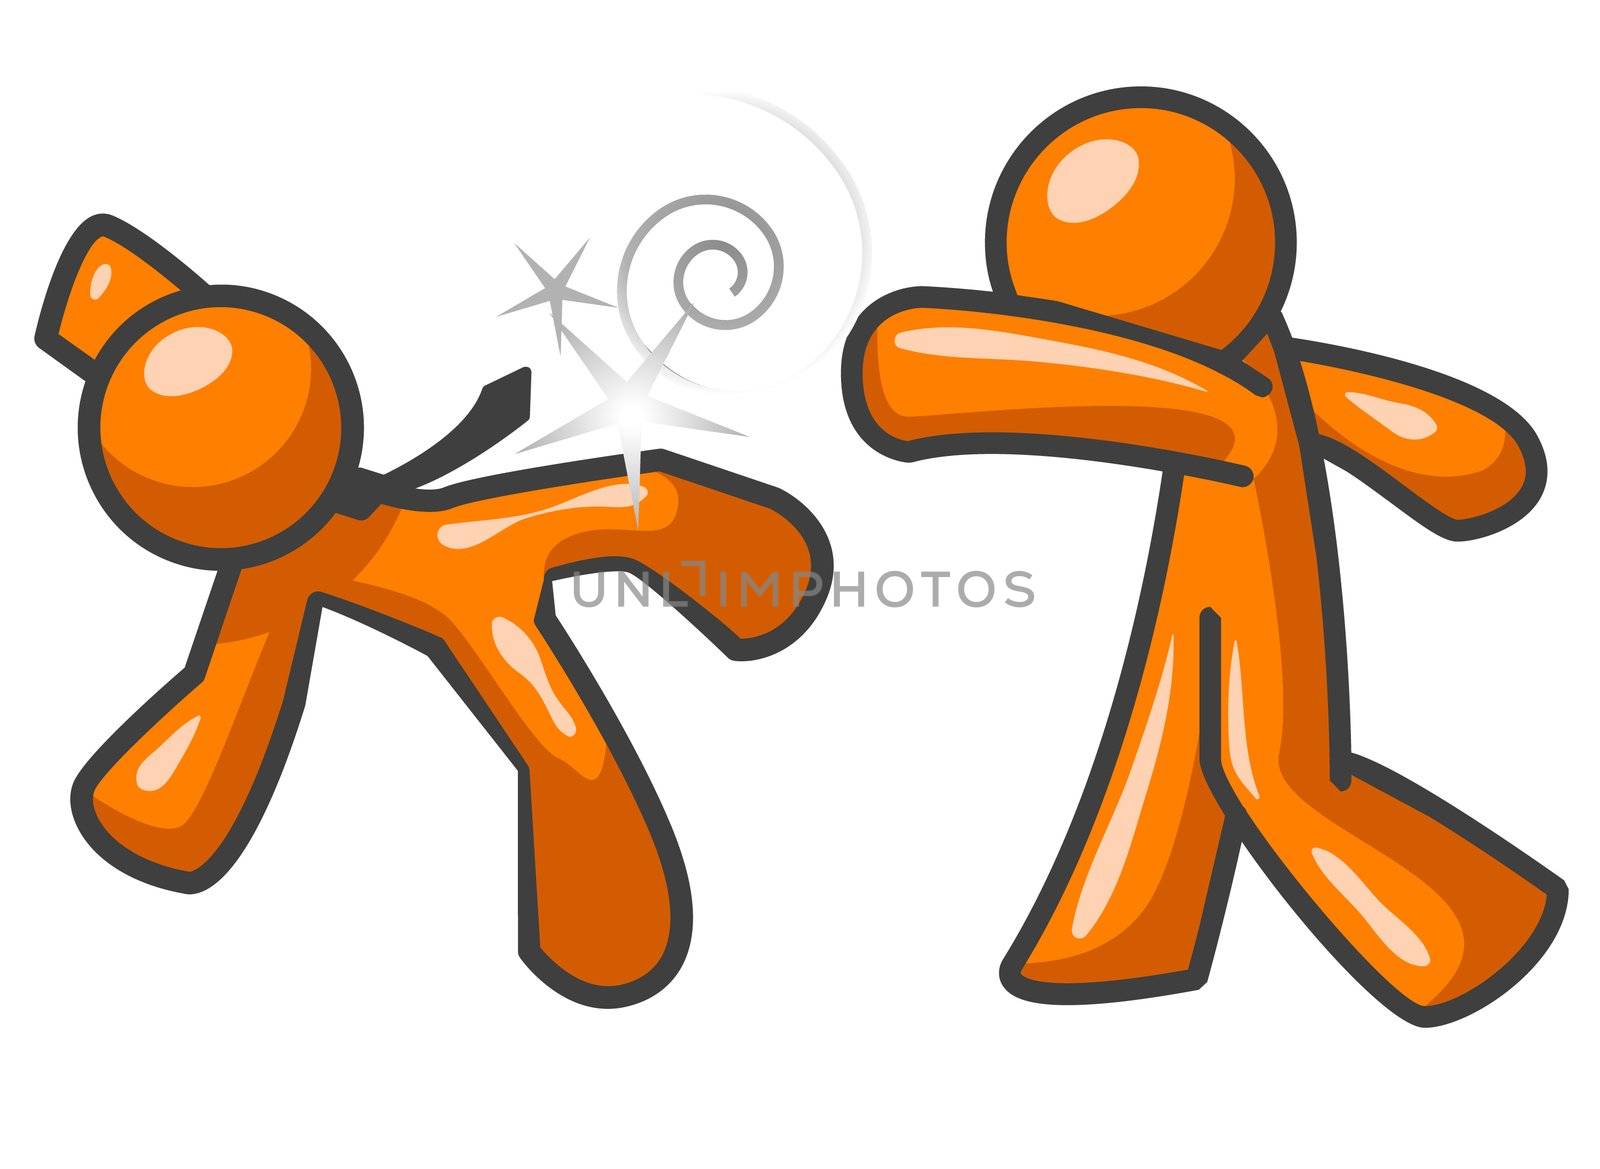 Two orange men fighting. One is punching the other. The other is falling down.